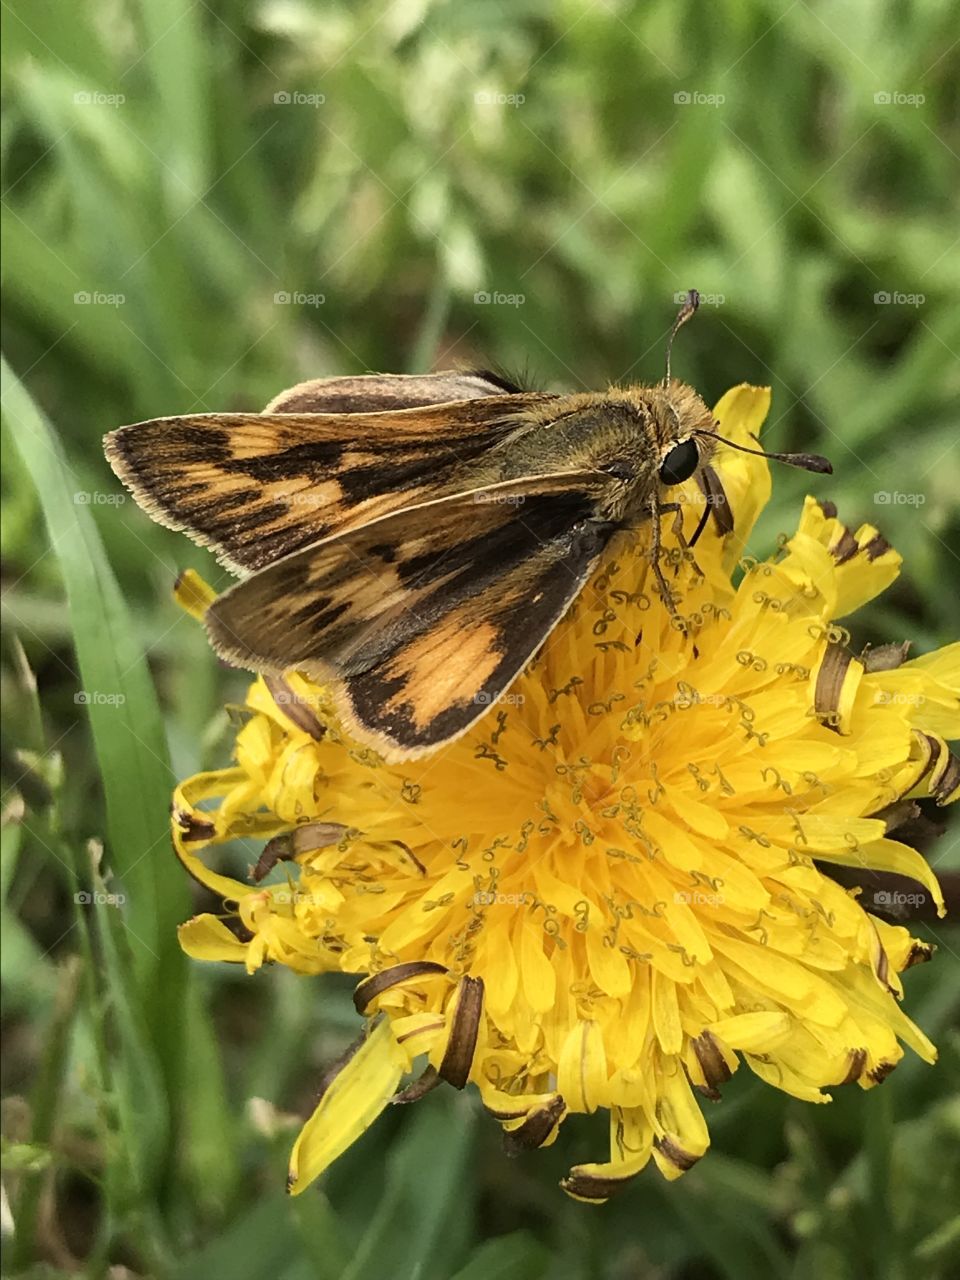 Small yellow butterfly feasting on a dandelion